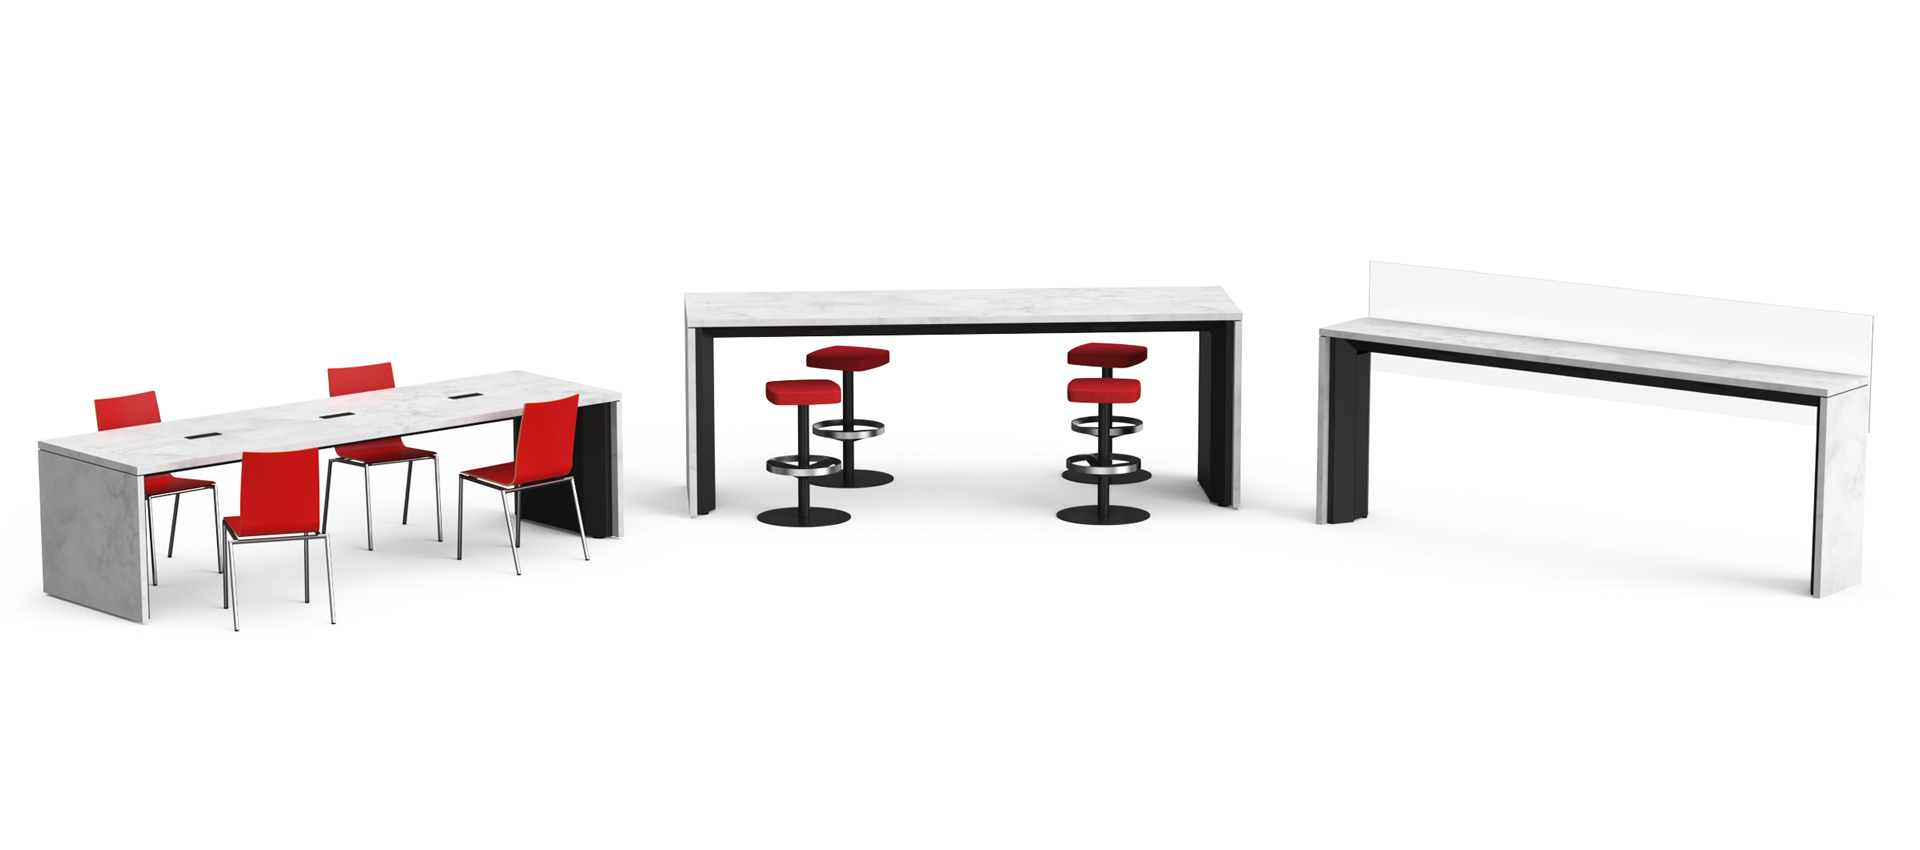 Collaborative furniture collection of charging power bar and table